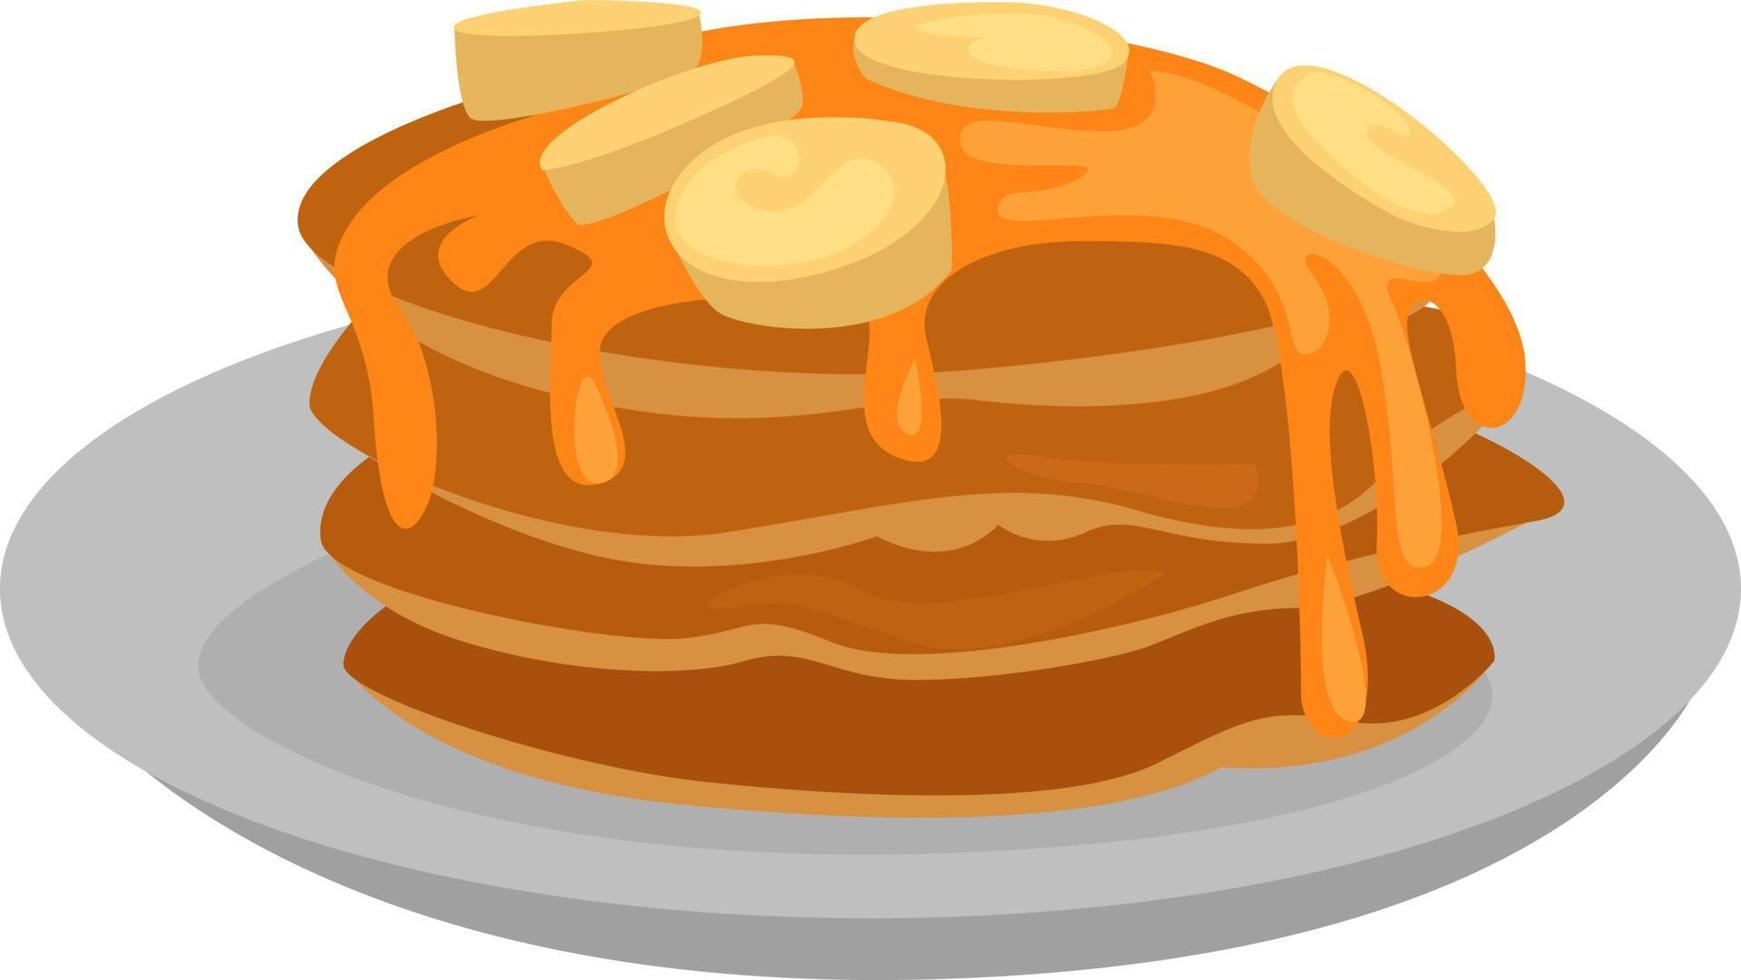 Pancakes on a plate, illustration, vector on white background